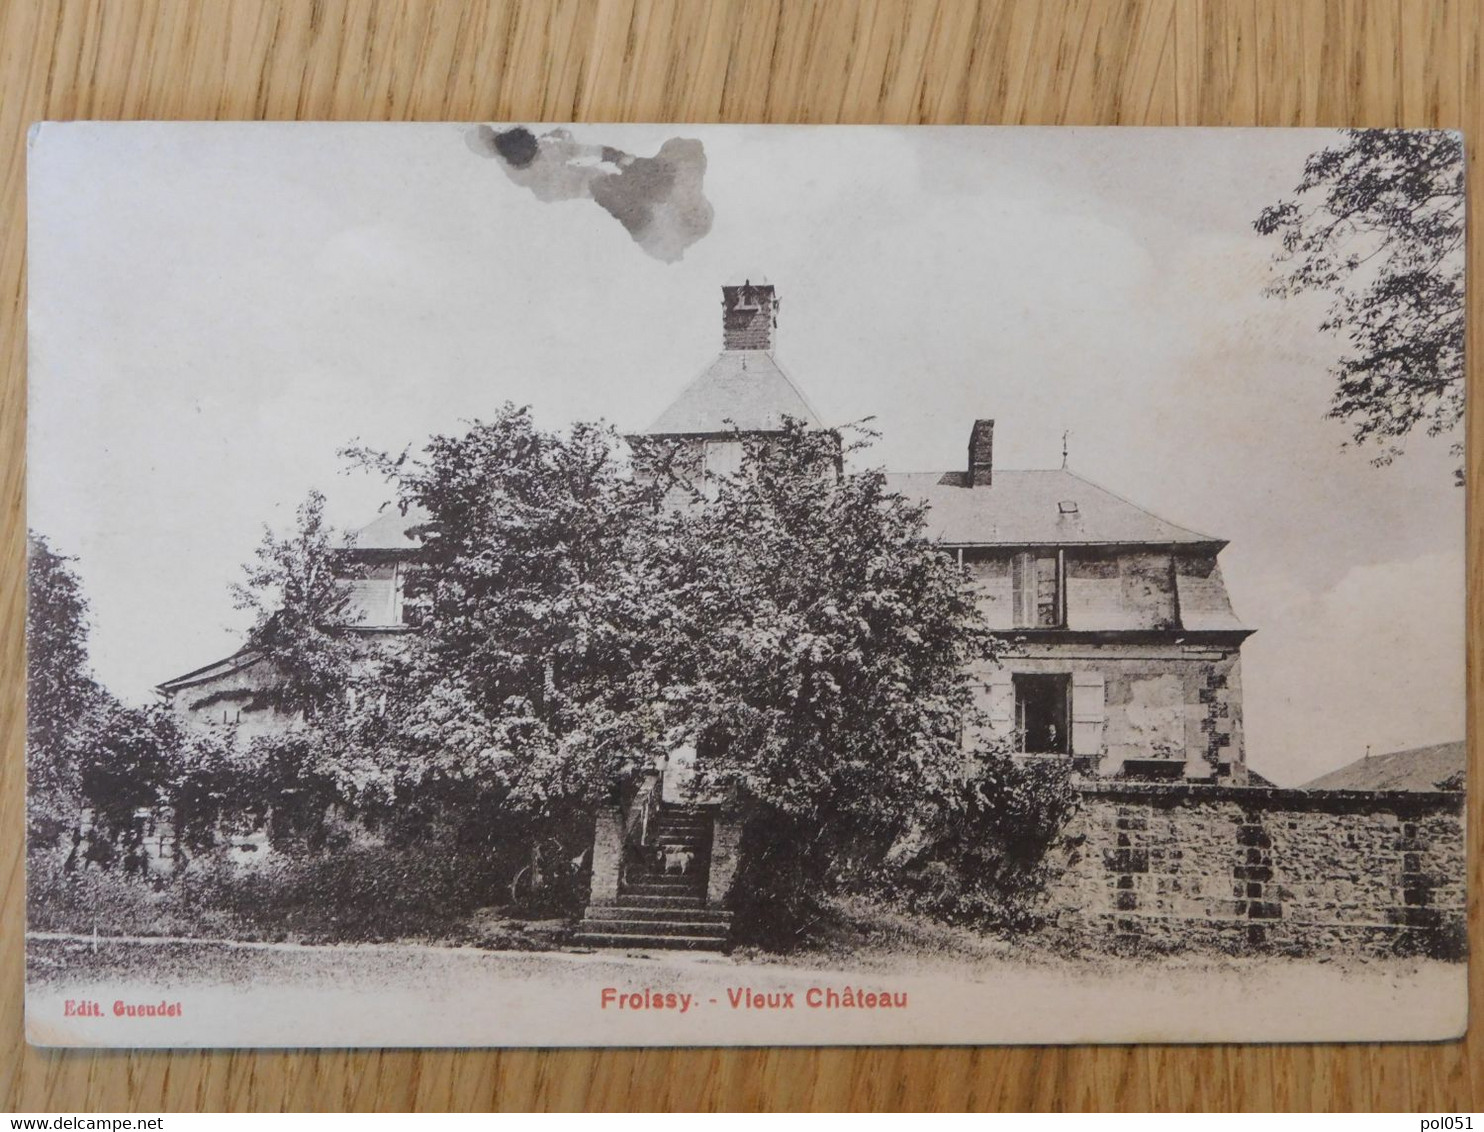 60 - OISE FROISSY Vieux Chateau - Froissy